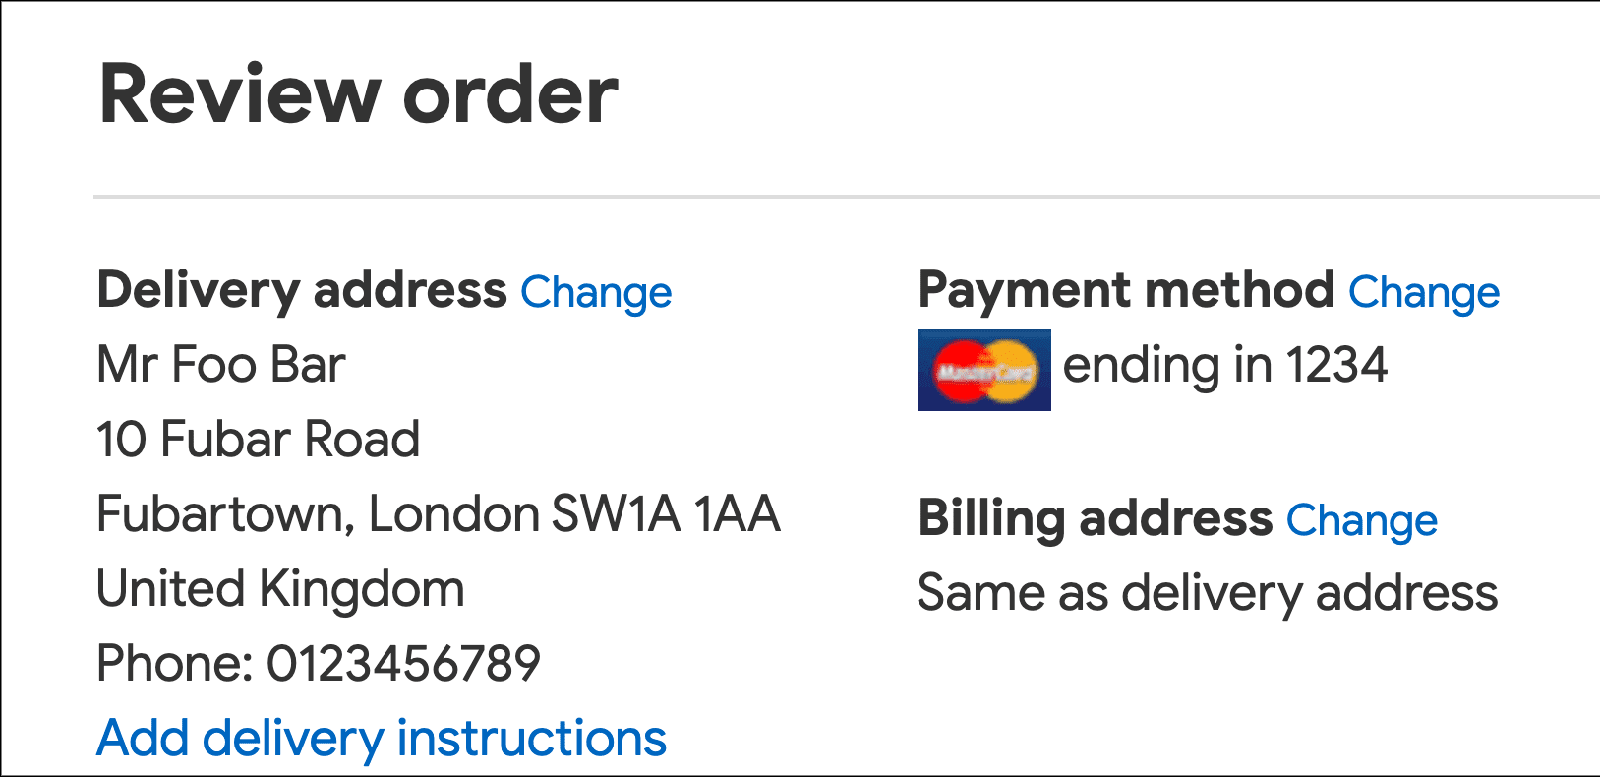 Screenshot of 'Review order' section of checkout page, showing text in plain text, with links to change delivery address, payment method and billing address, which are not displayed.